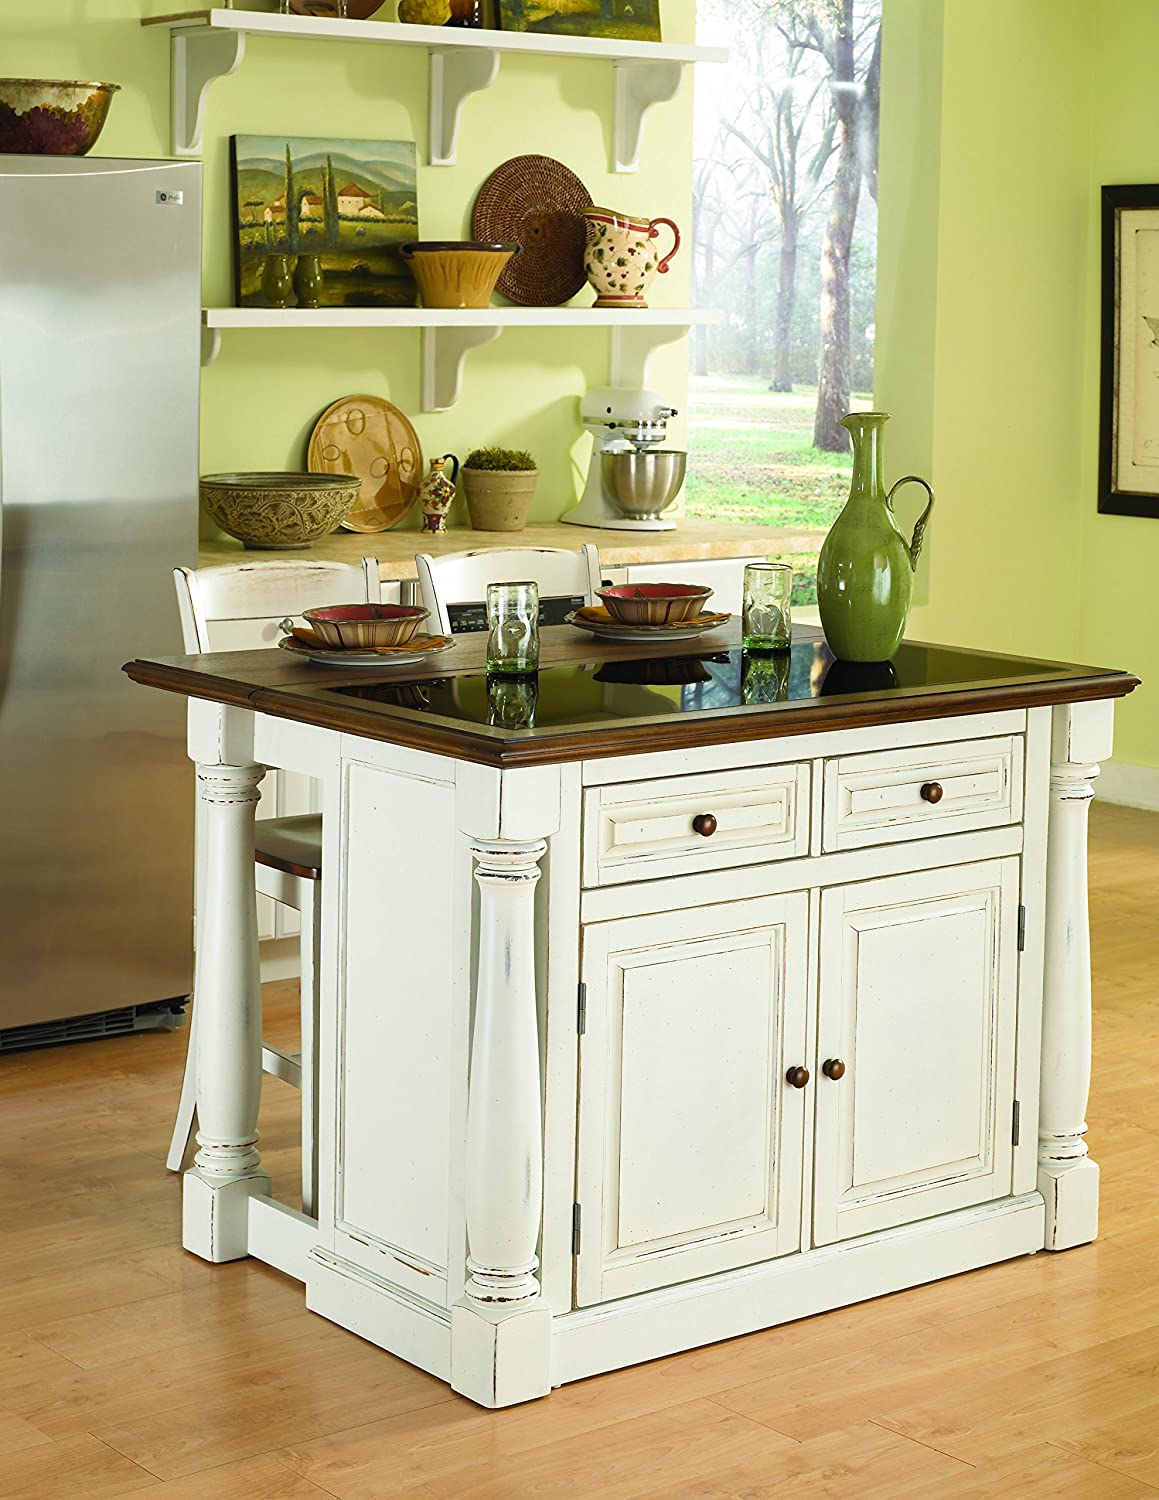 Bar Cabinet: White with Granite Top, Breakfast Bar, Two Drawers, and Four Adjustable Shelves 